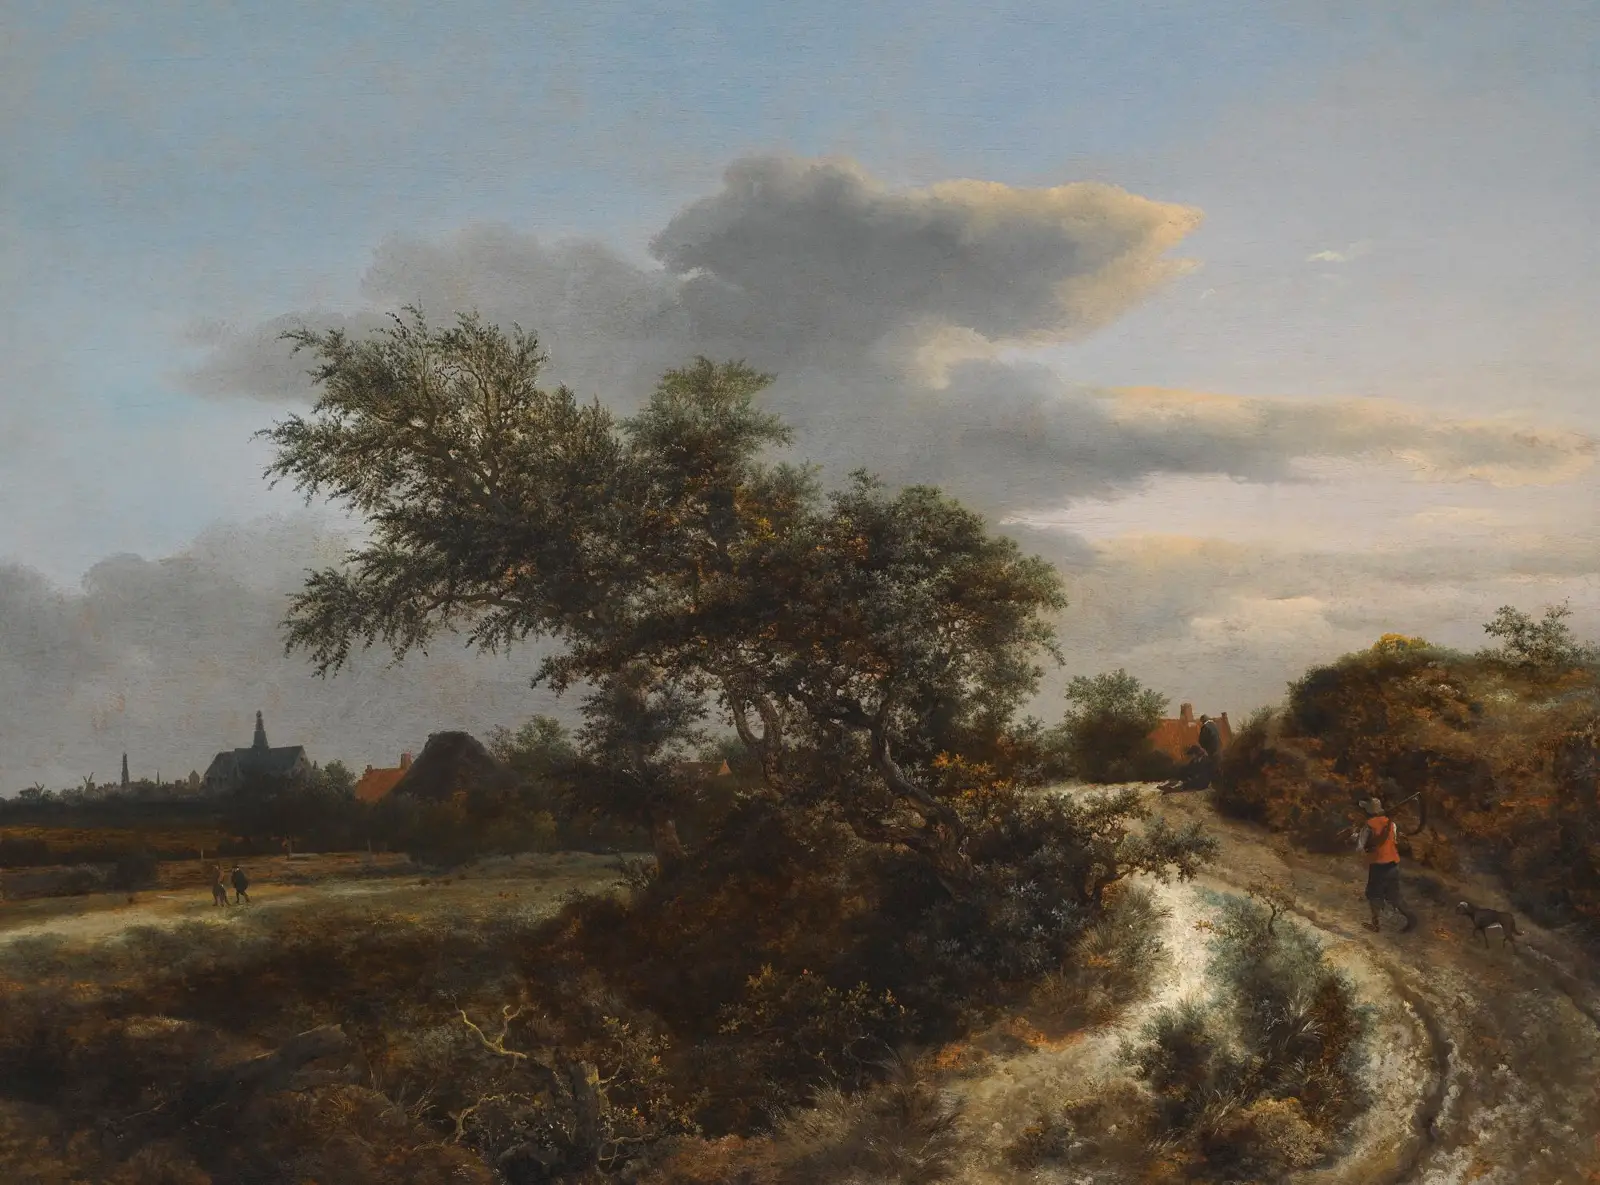 landscape painting from the Dutch Golden Age